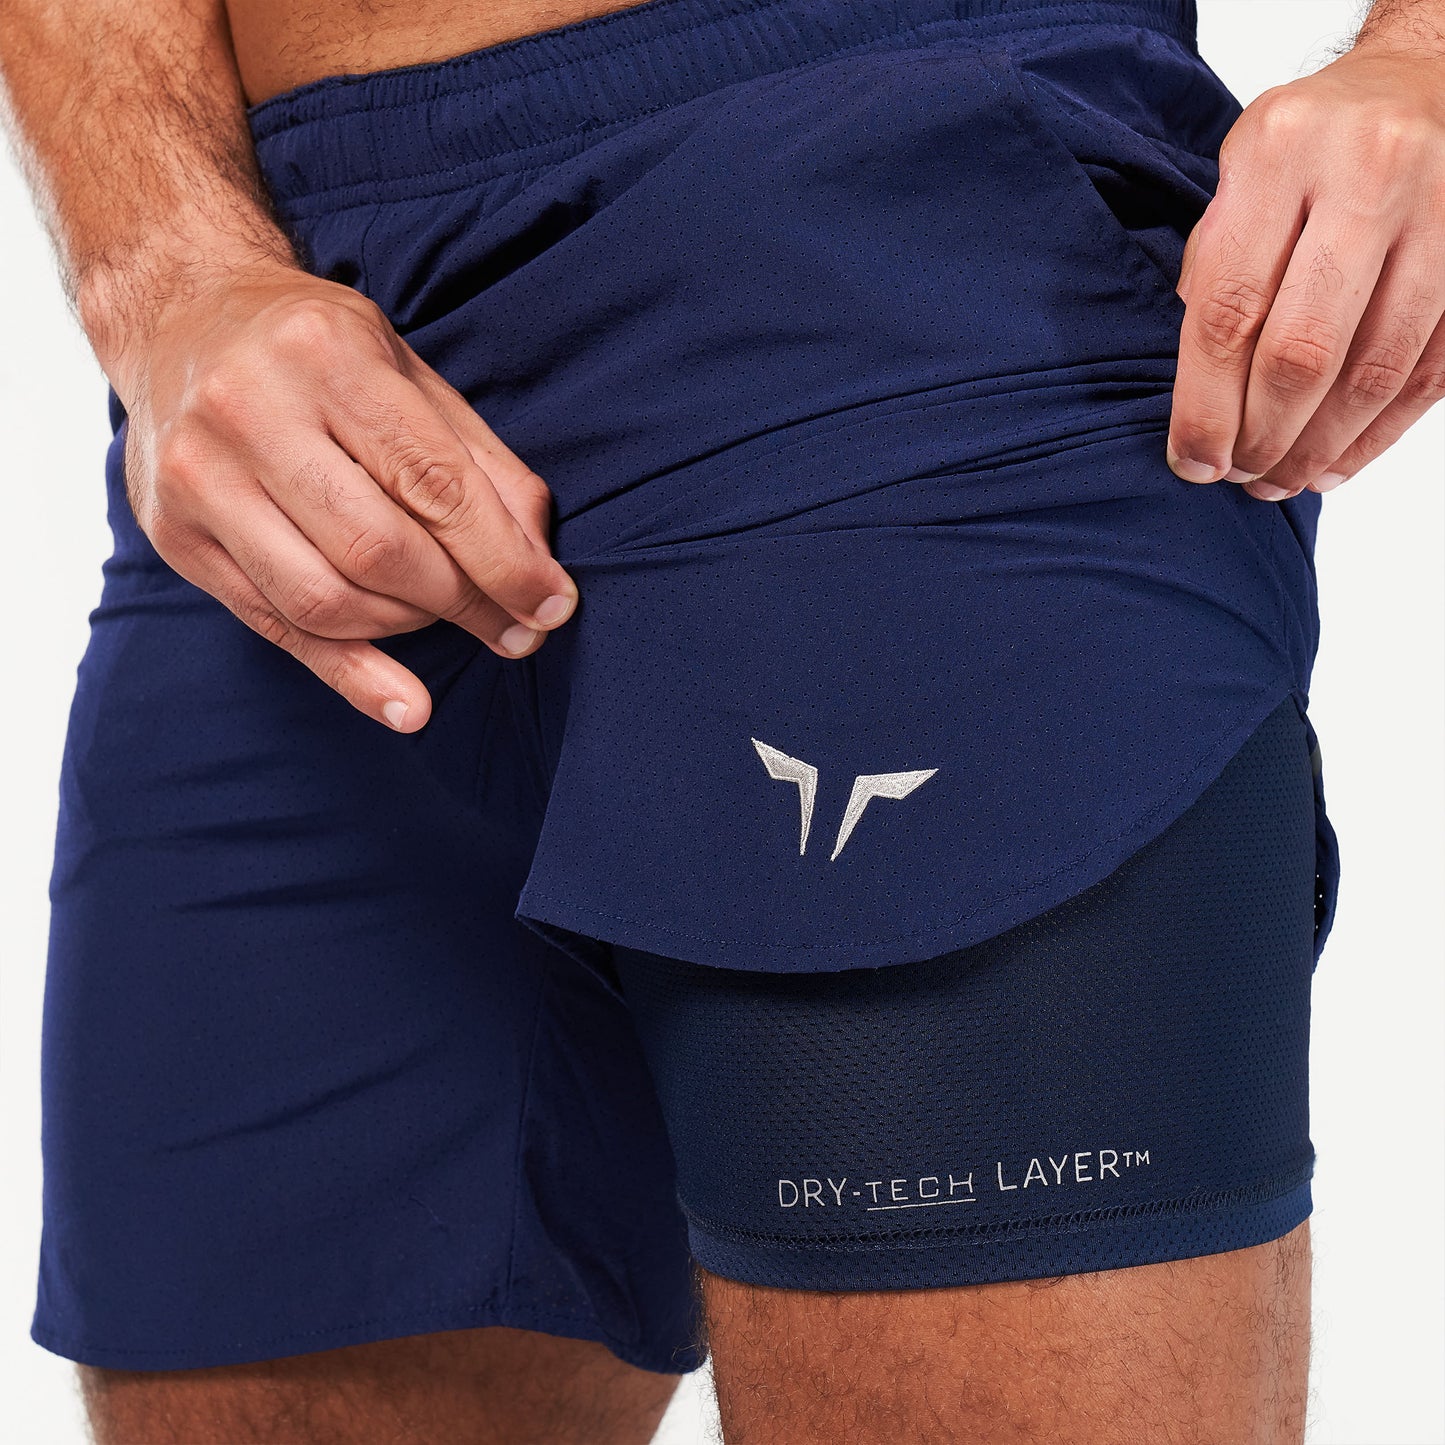 squatwolf-gym-wear-2-in-1-dry-tech-shorts-blue-workout-short-for-men